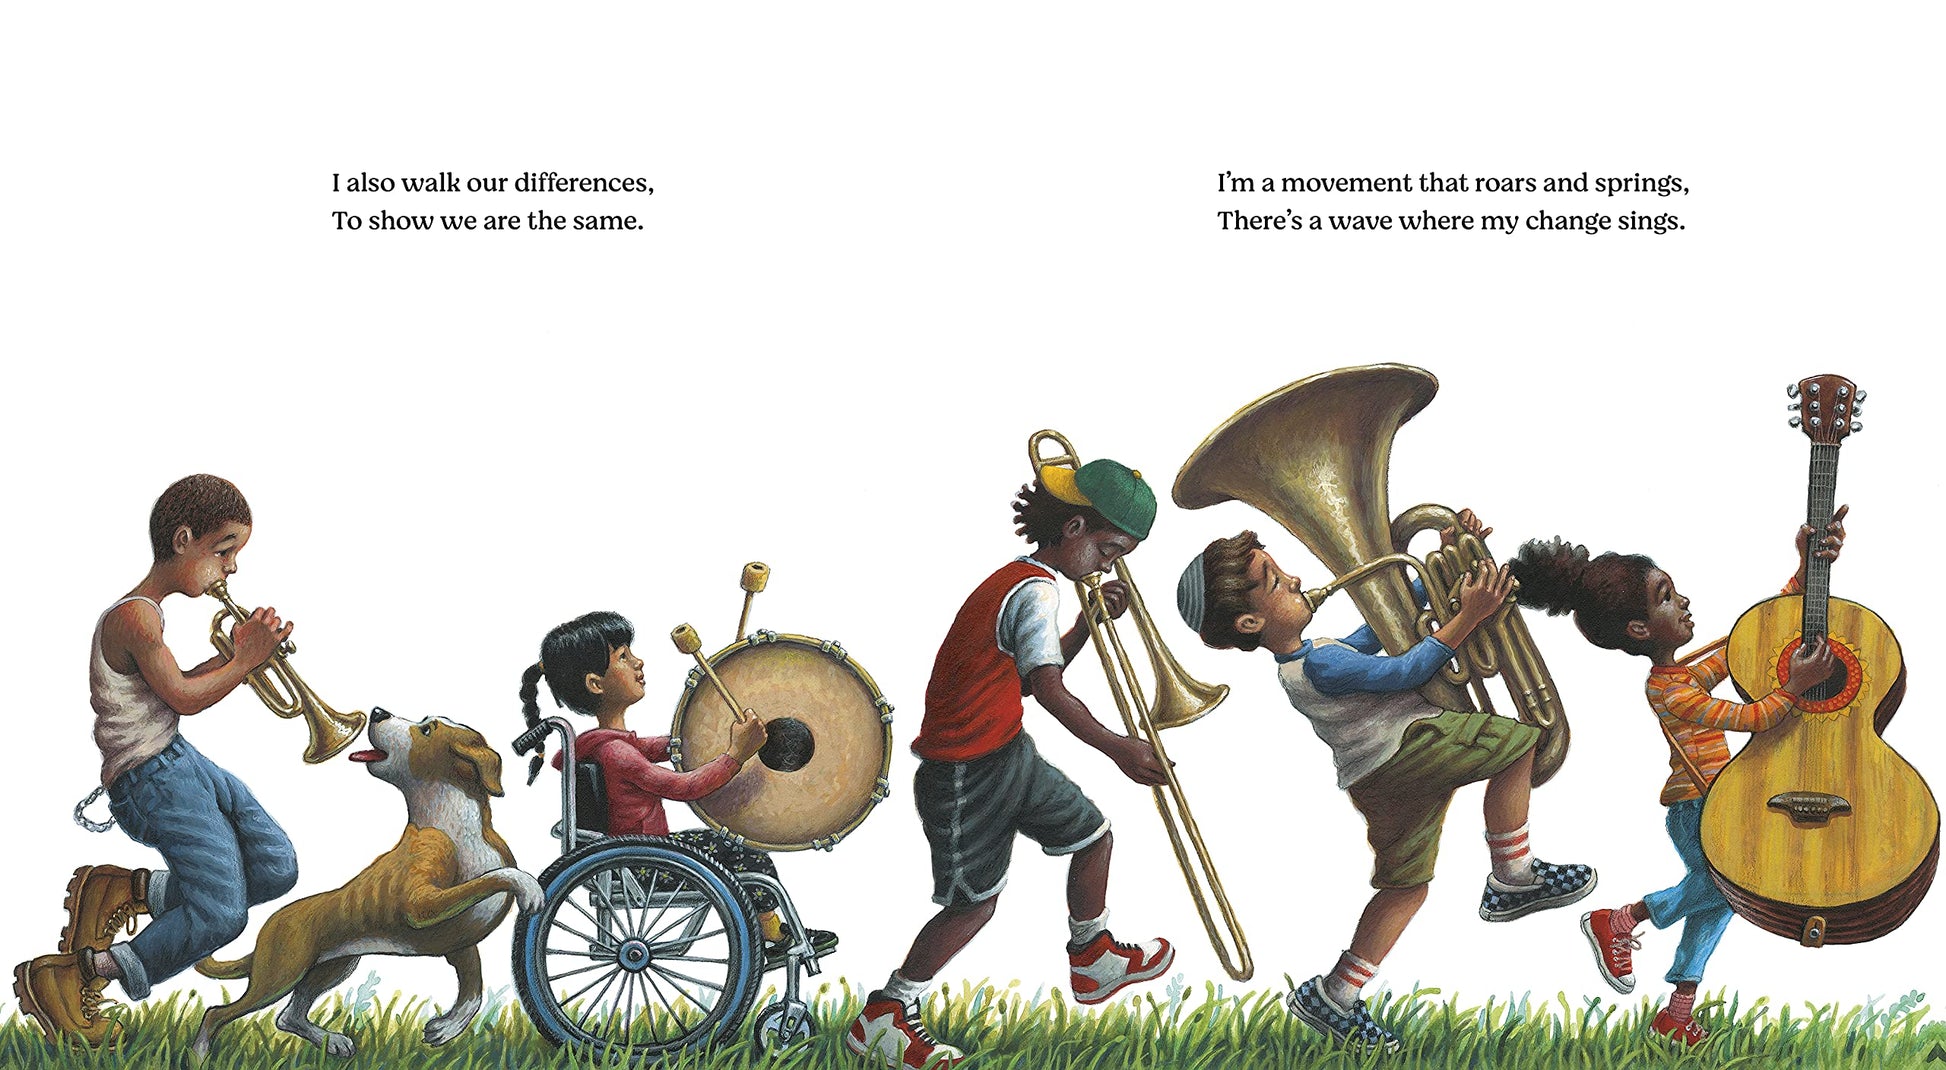 Inside page from ‘Change Sings: A Children's Anthem’ featuring illustrations of kids playing instruments.